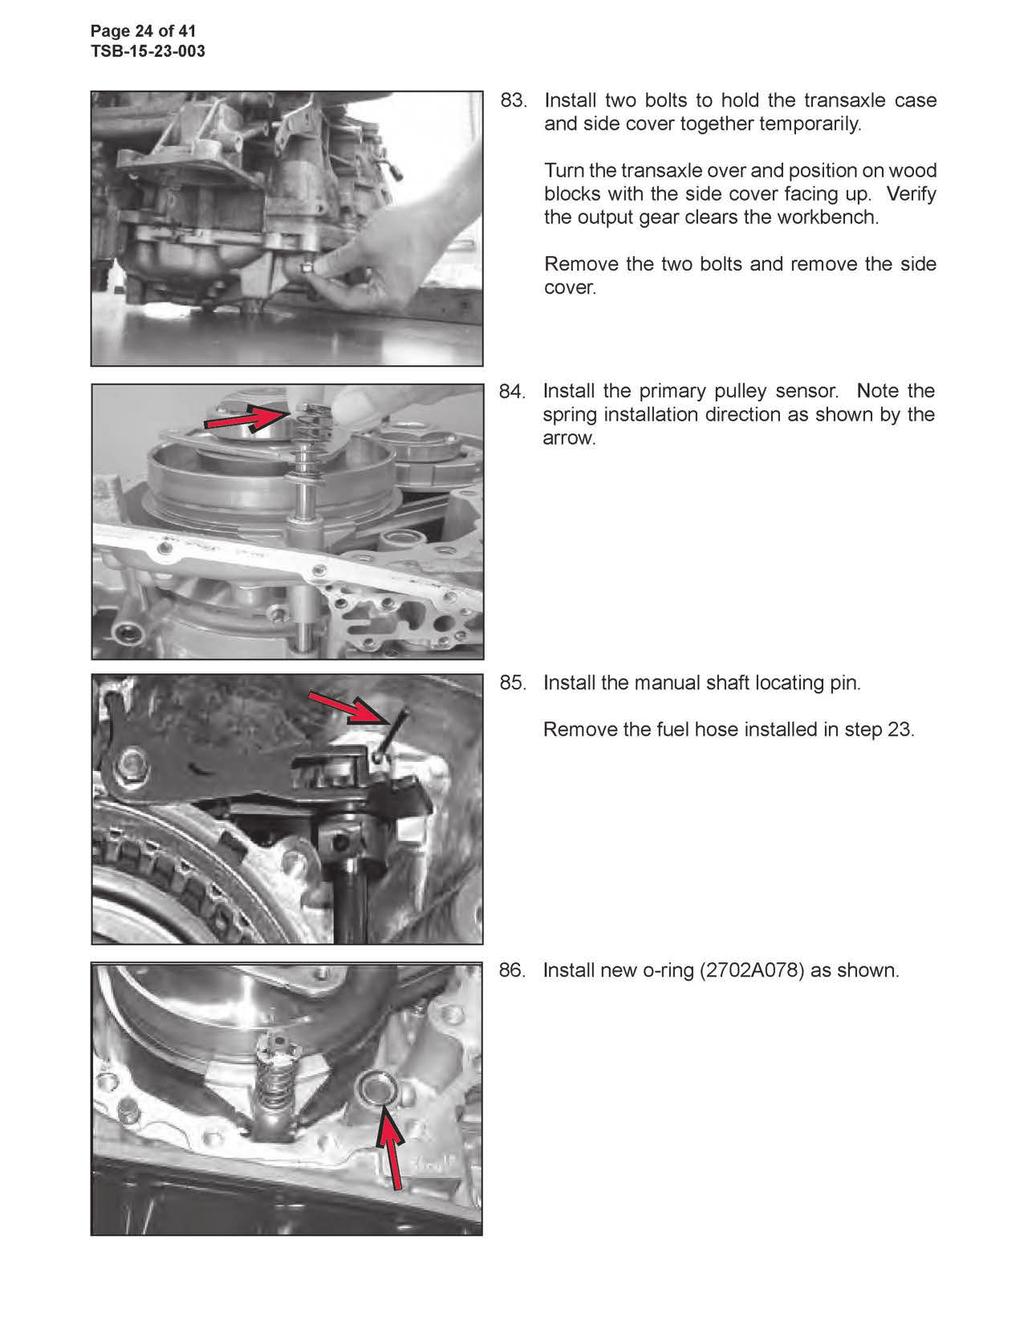 Page 24 of 41 83. Install two bolts to hold the transaxle case and side cover together temporarily. Turn the transaxle over and position on wood blocks with the side cover facing up.